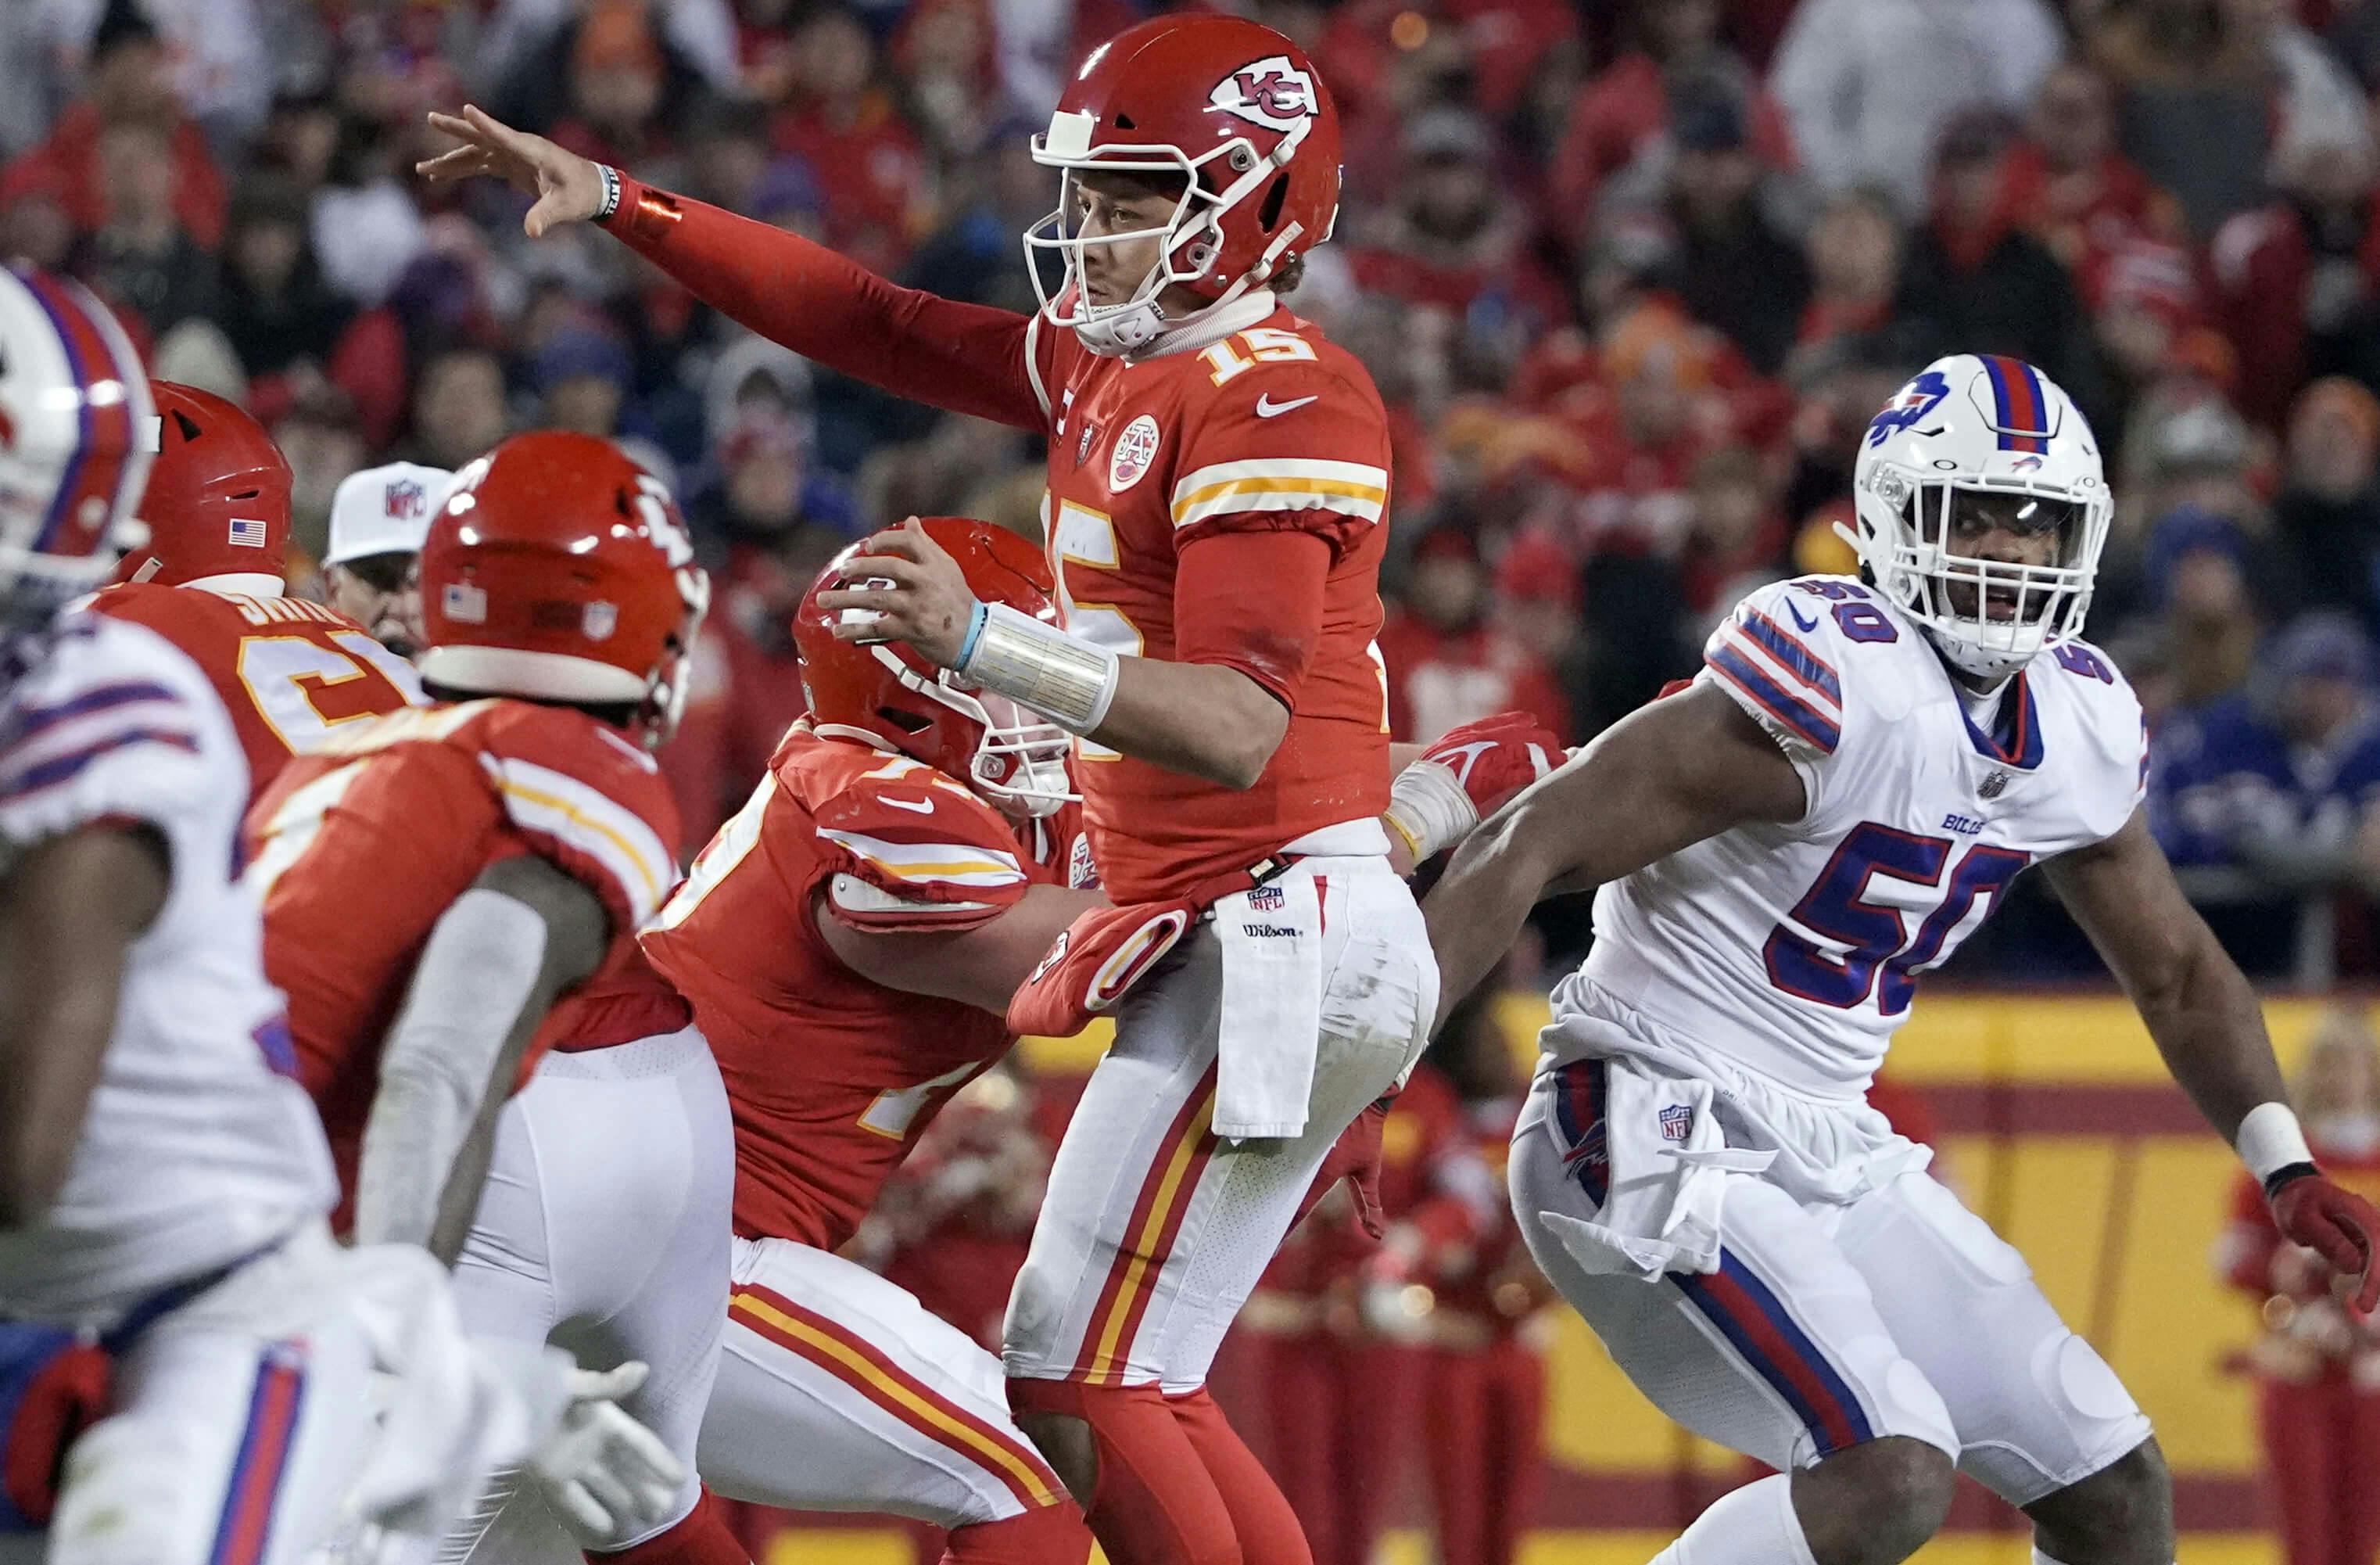 Kansas City Chiefs quarterback Patrick Mahomes (15) passing against the Buffalo Bills during overtime in the AFC Divisional playoff football game at GEHA Field at Arrowhead Stadium.